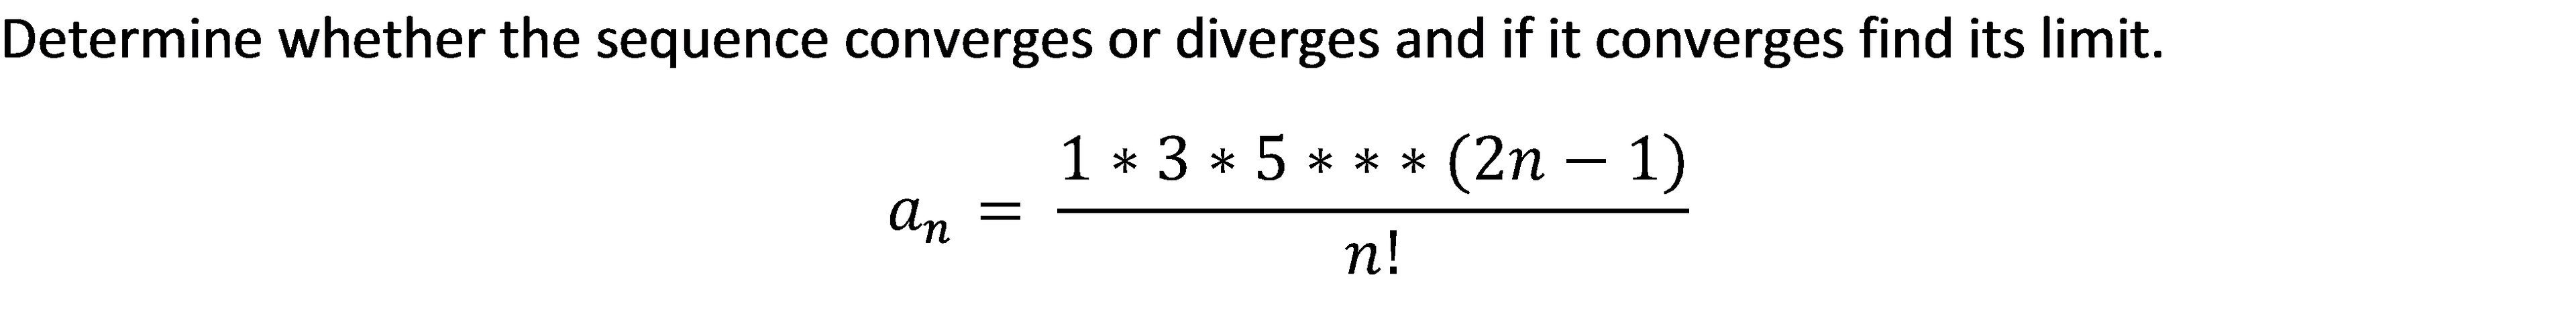 Determine whether the sequence converges or diverges and if it converges find its limit.
1 * 3 * 5 *** (2n – 1)
An =
n!
